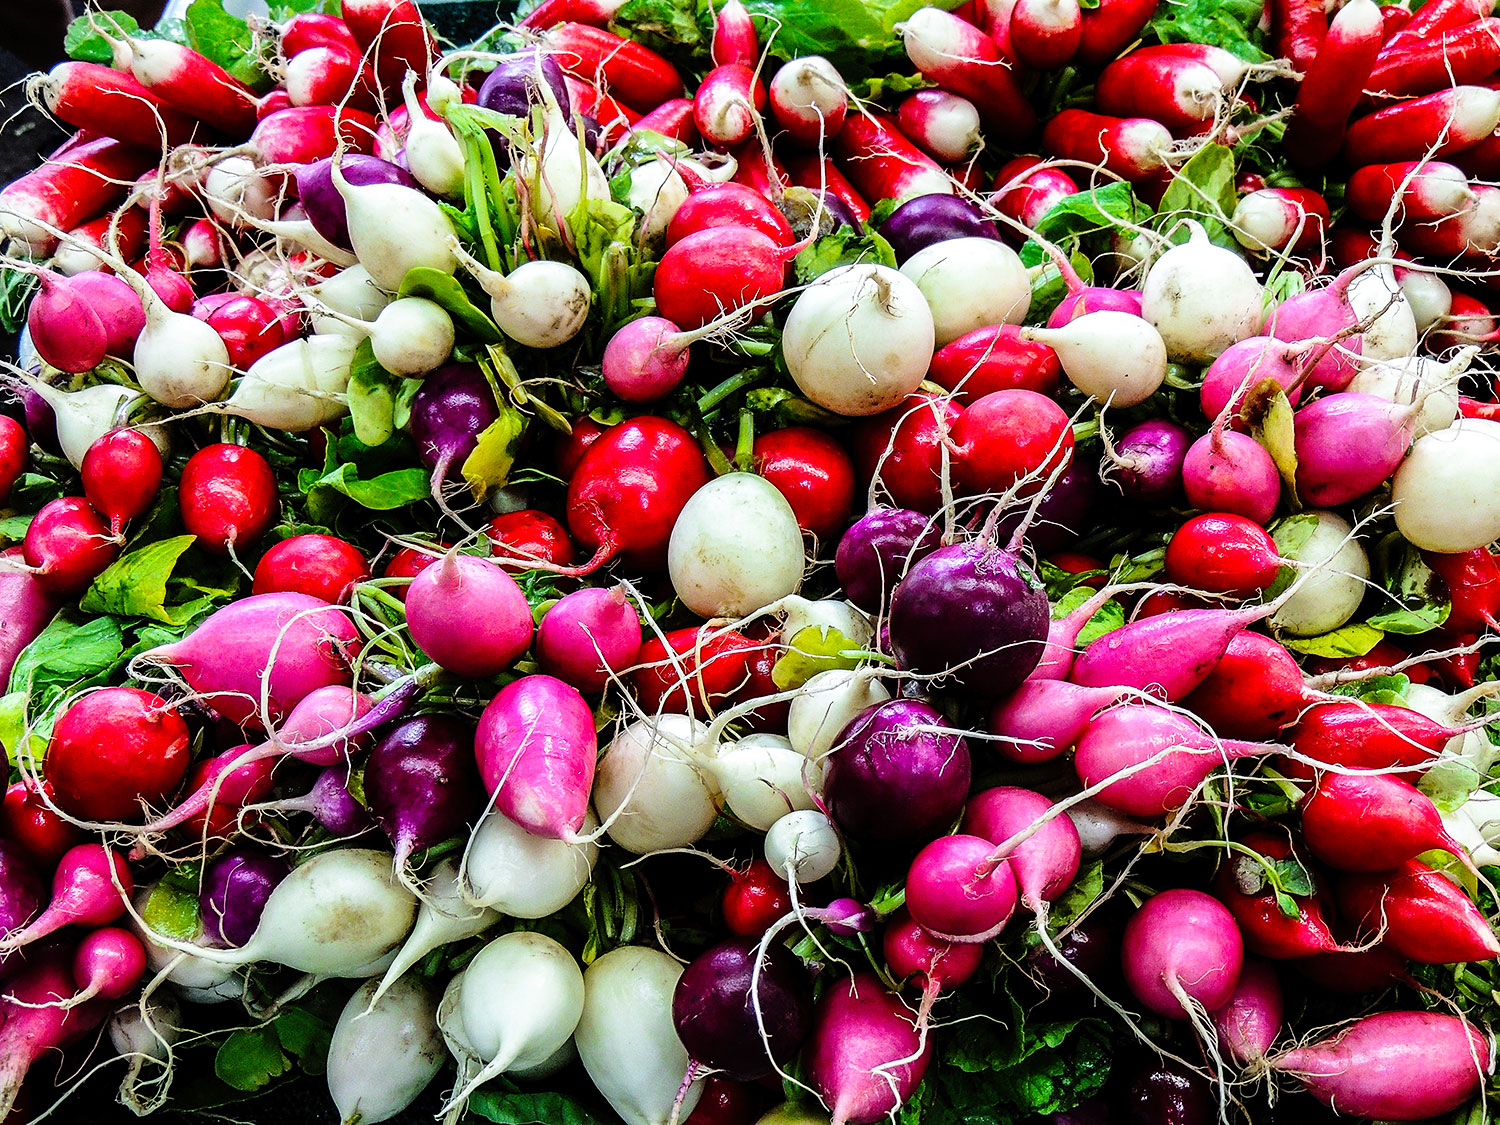 White, red and purple radishes, photo by Philippe Collard